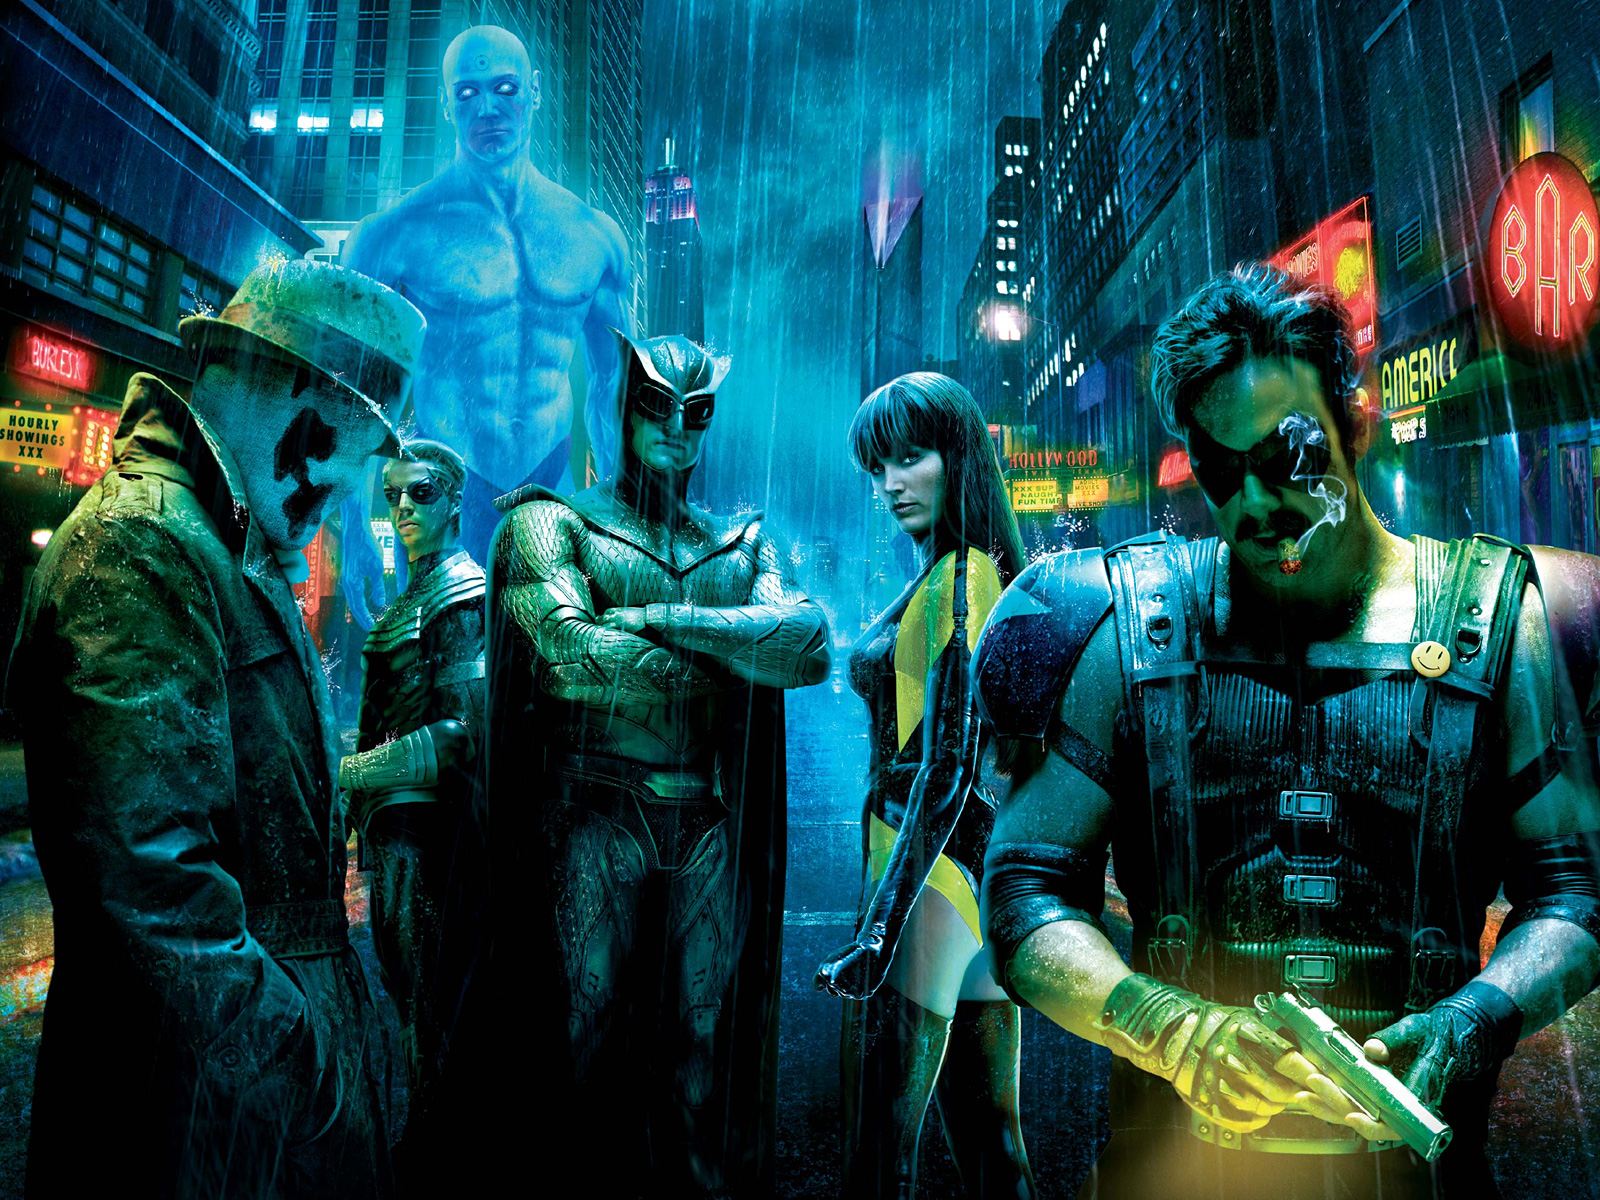 Watchmen Director Zack Snyder Fires Back, Blasting Joel Silver And Terry Gilliam's Proposed Ending